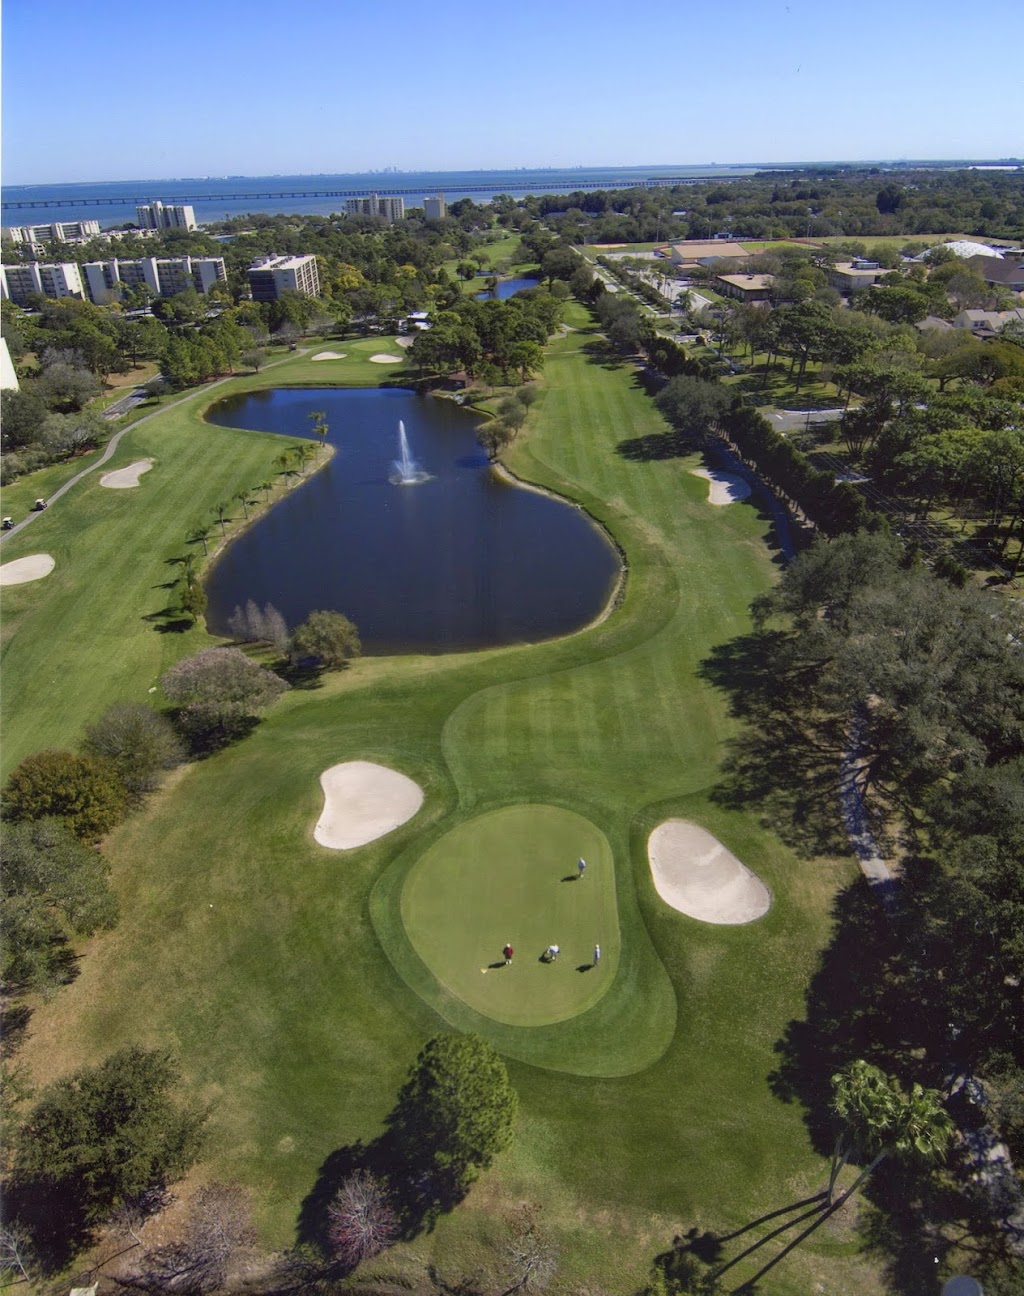 Cove Cay Golf Club | 2612 Cove Cay Dr, Clearwater, FL 33760 | Phone: (727) 535-1406